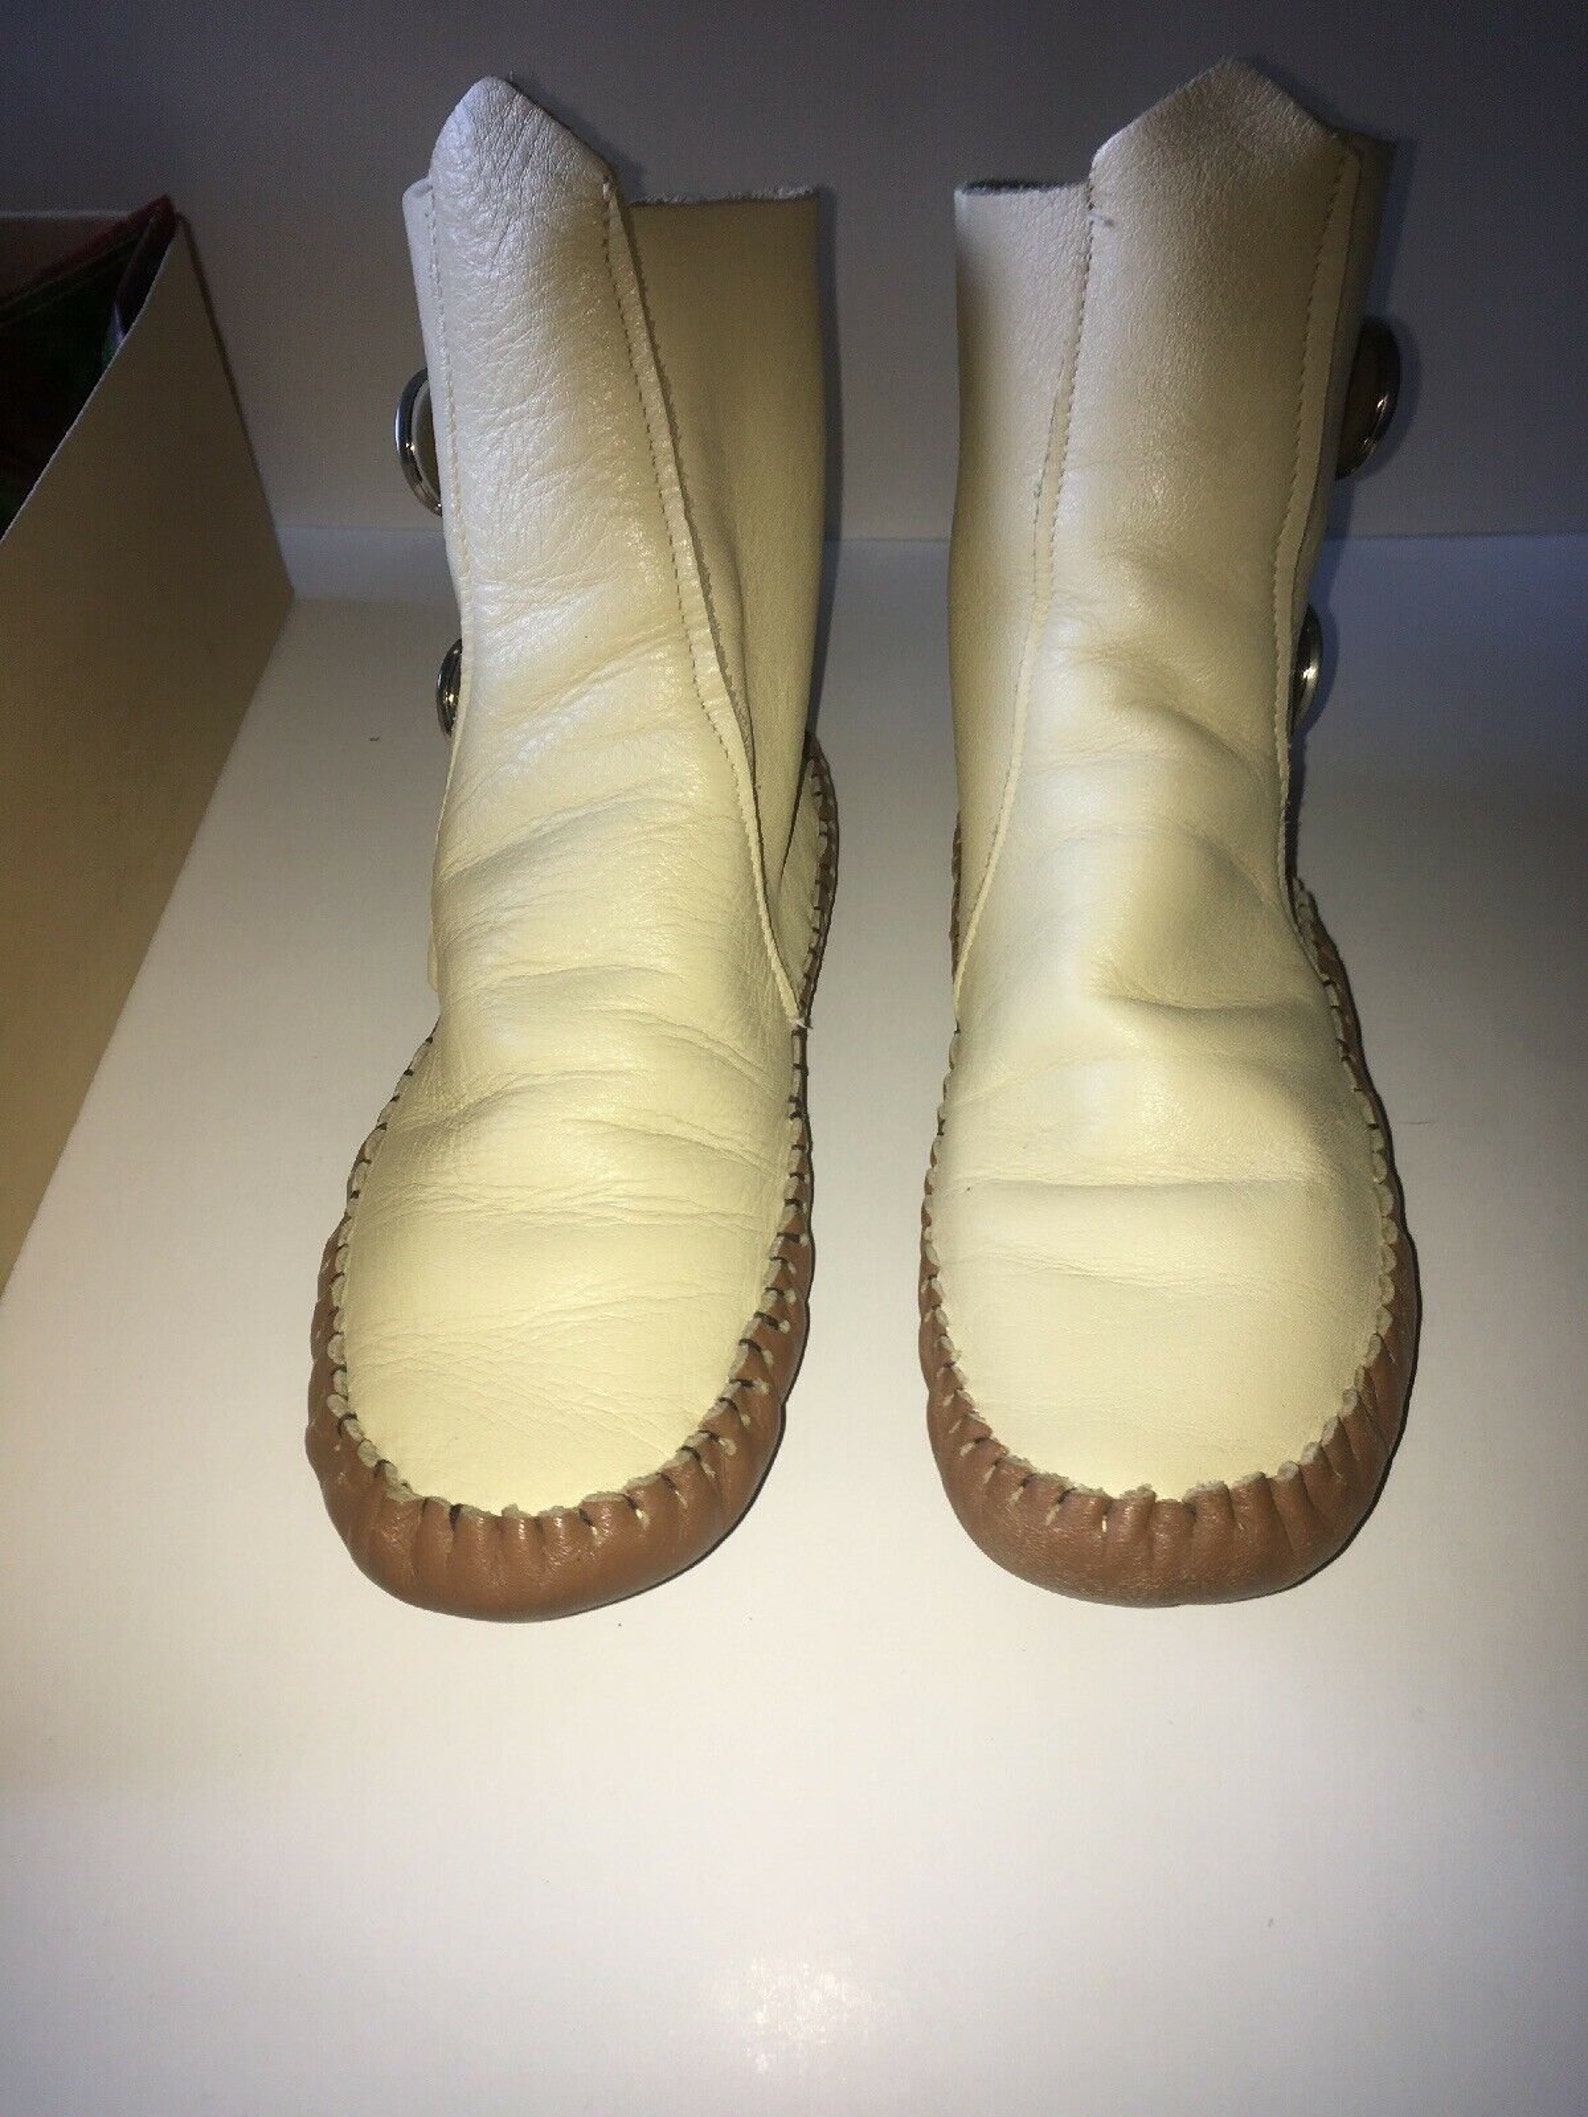 Moccasin Vintage TAOS Pueblo Beige Smooth Leather With 4 | Etsy